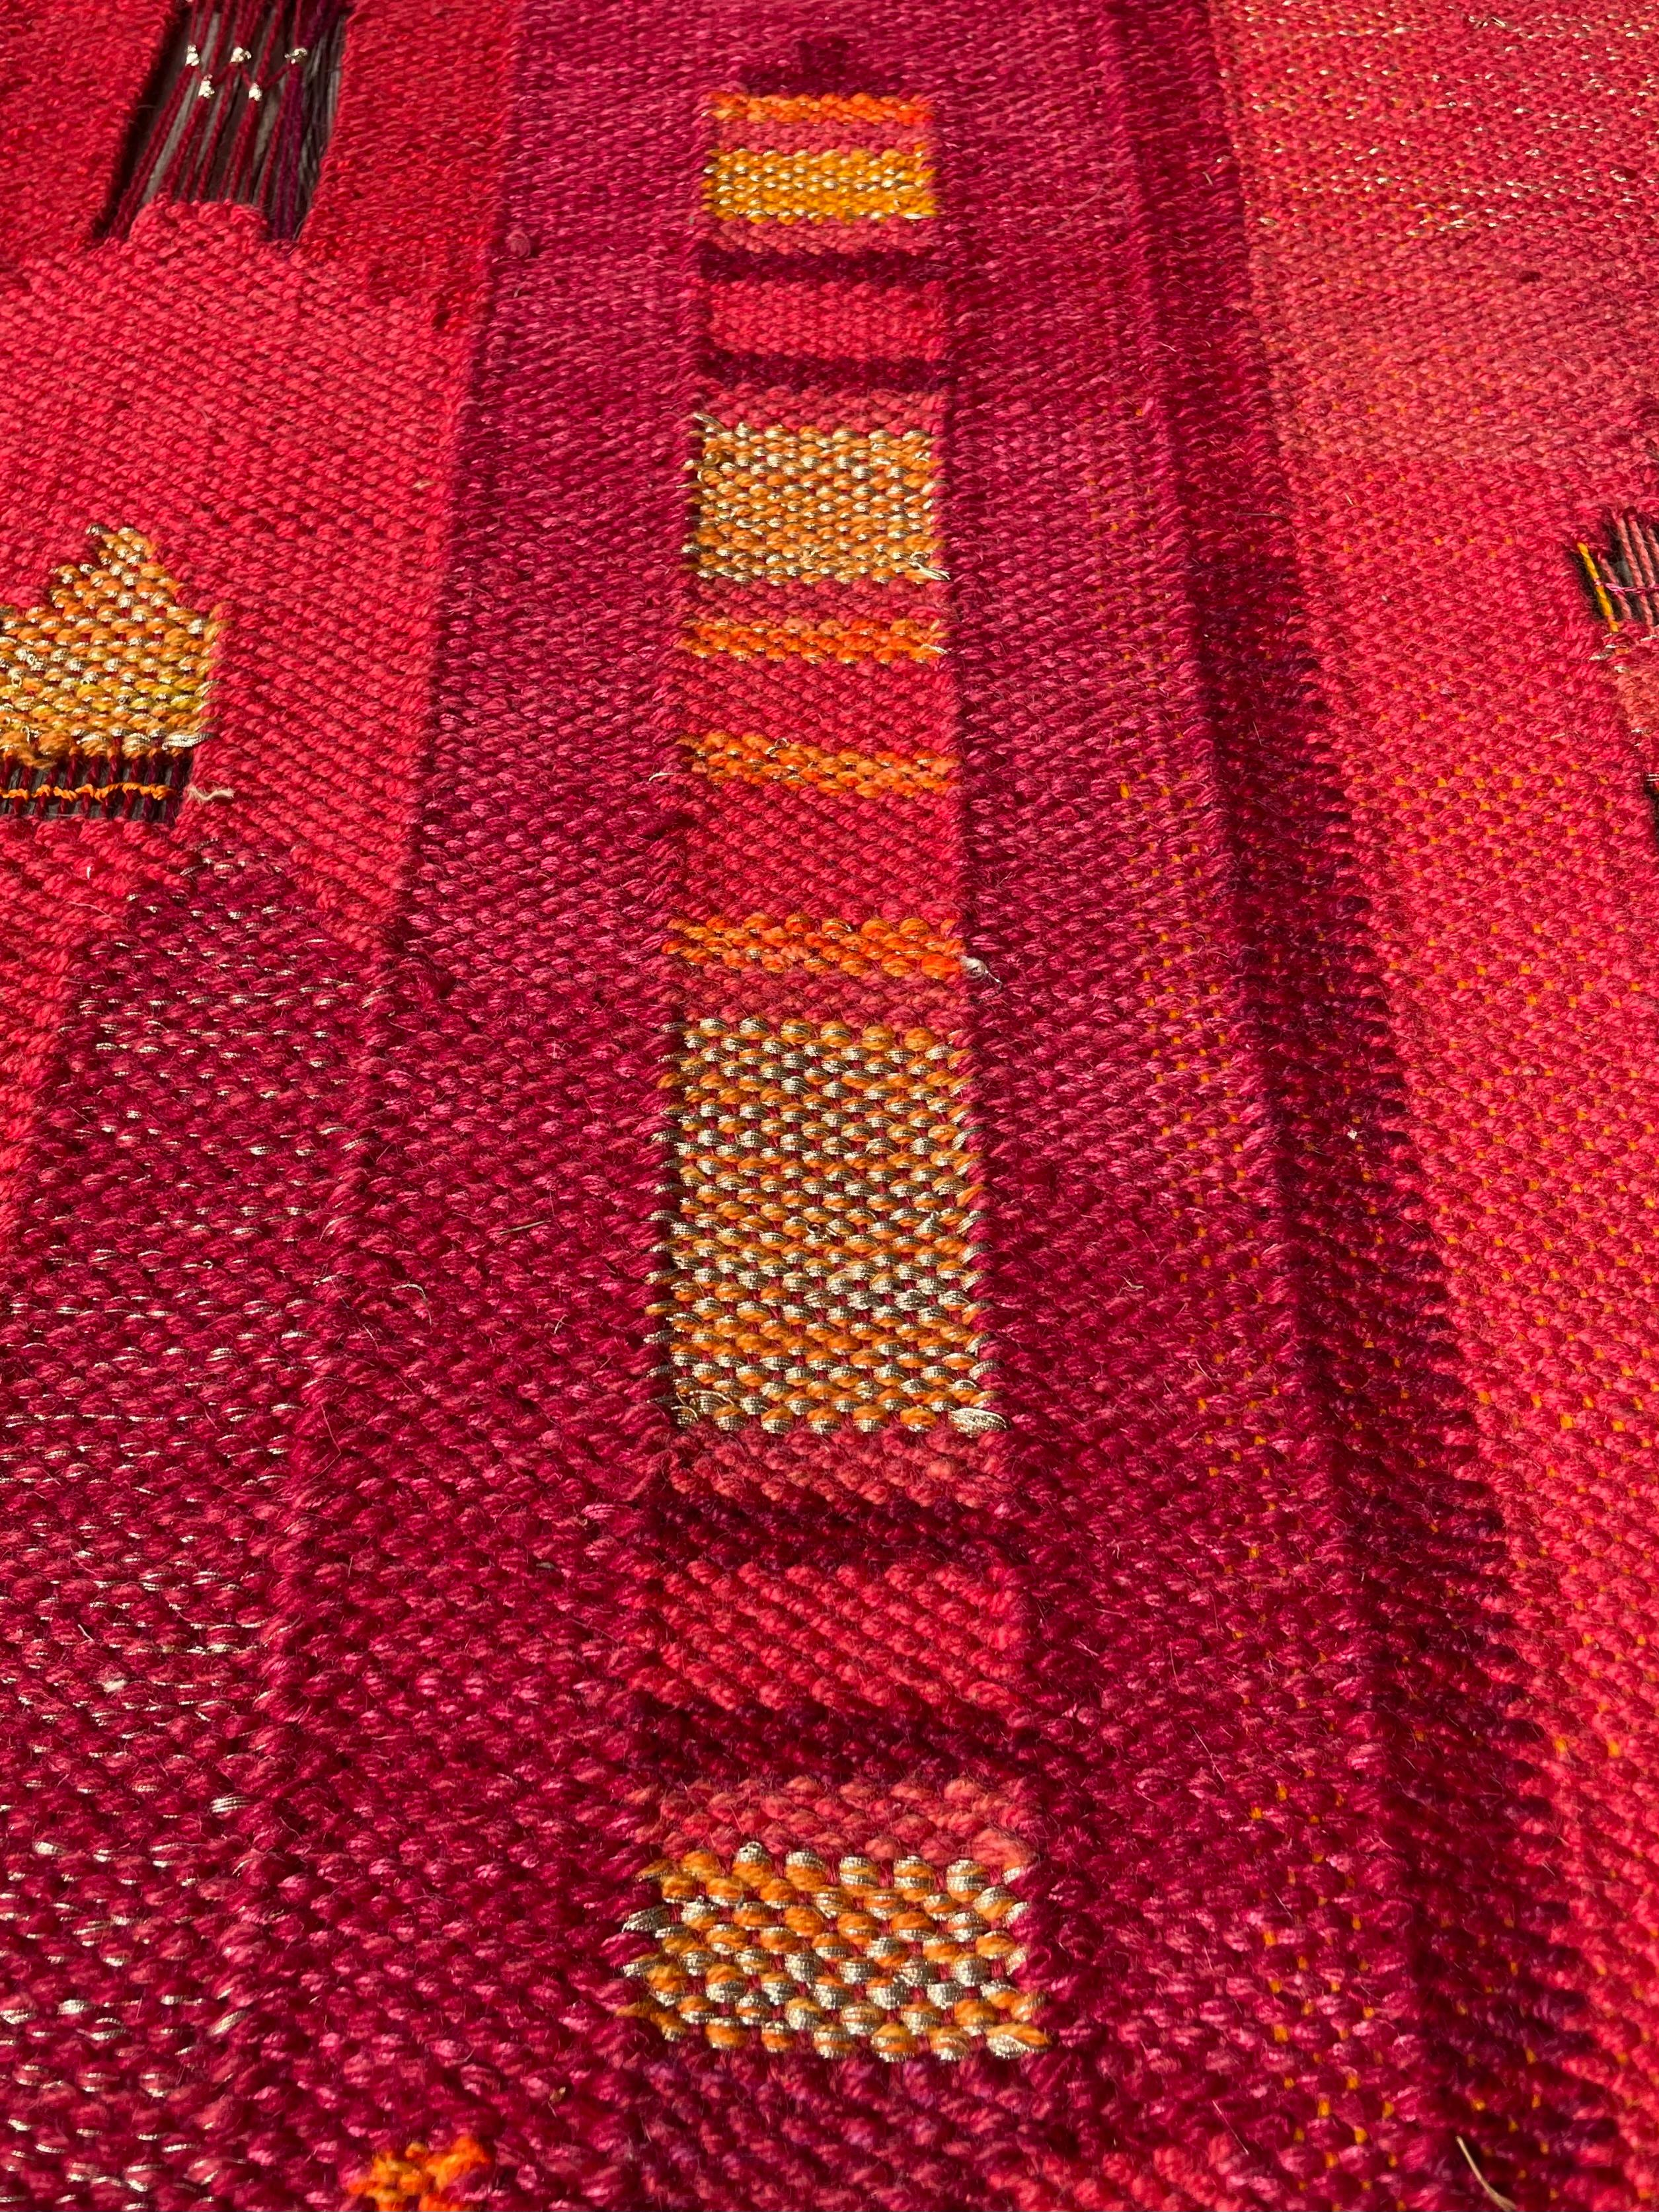 Considerable Large Handwoven Swedish Red Color Range Tapestry by Irma Kronlund For Sale 1